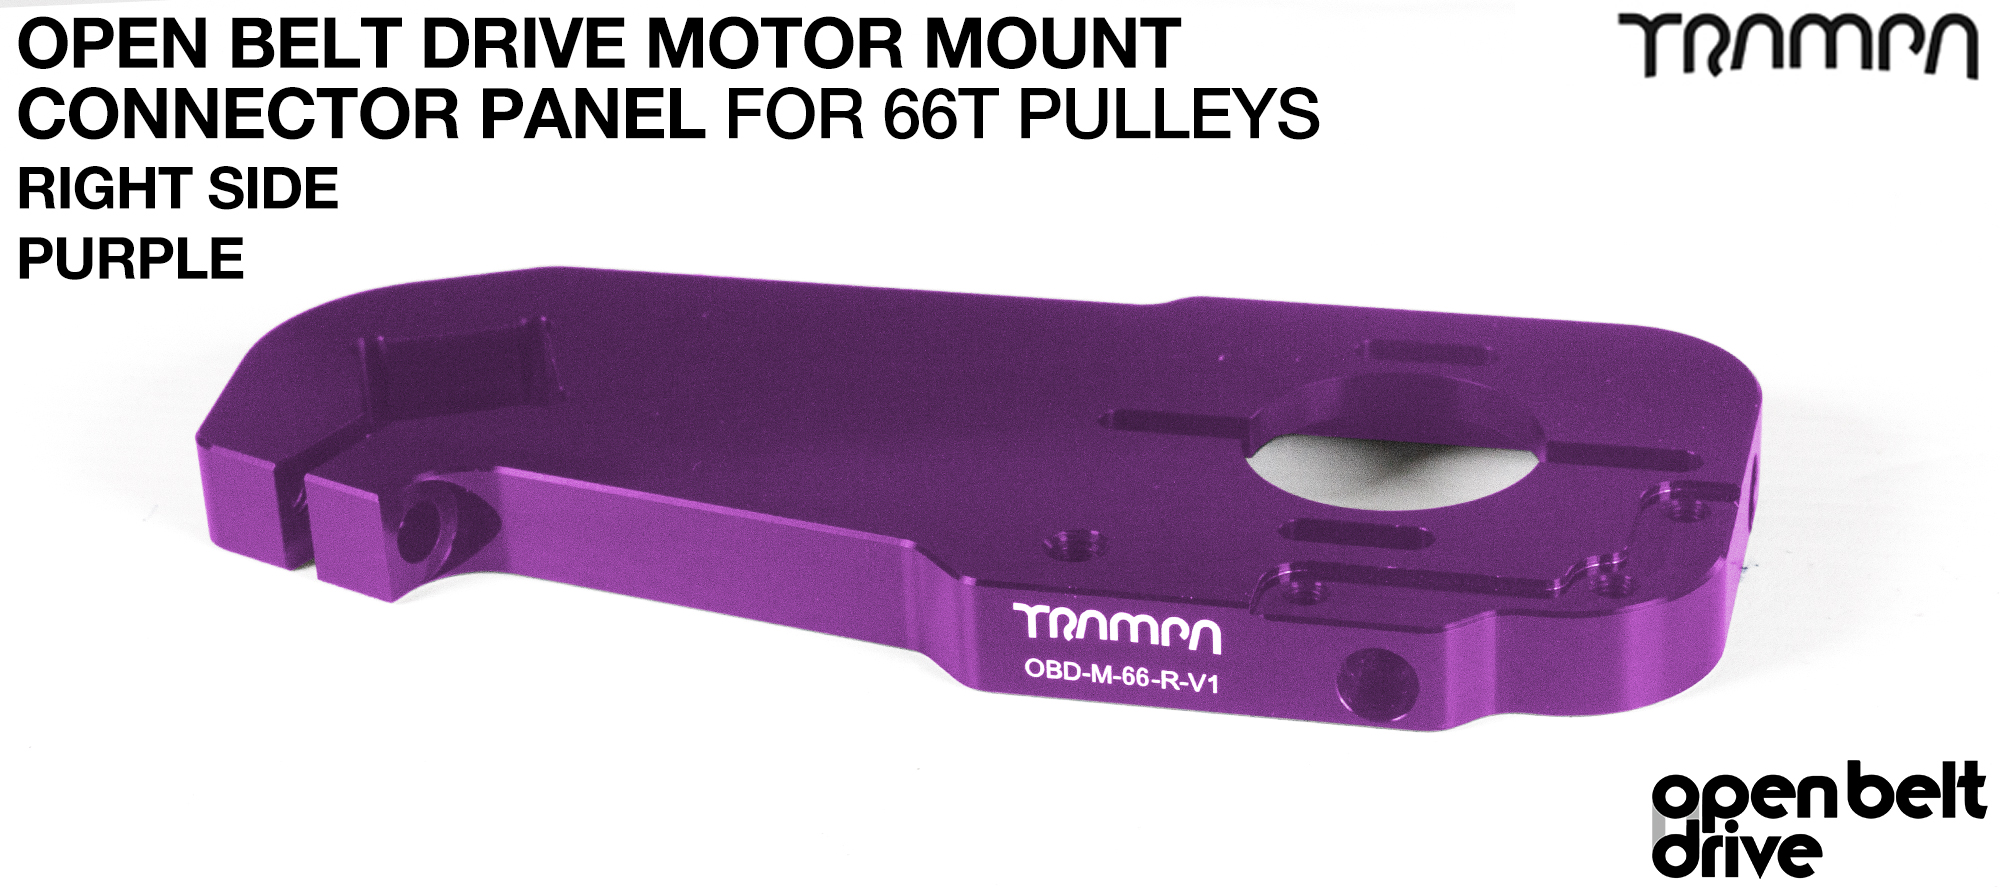 OBD Open Belt Drive Motor Mount Connector Panel for 66 tooth Pulleys - GOOFY - PURPLE